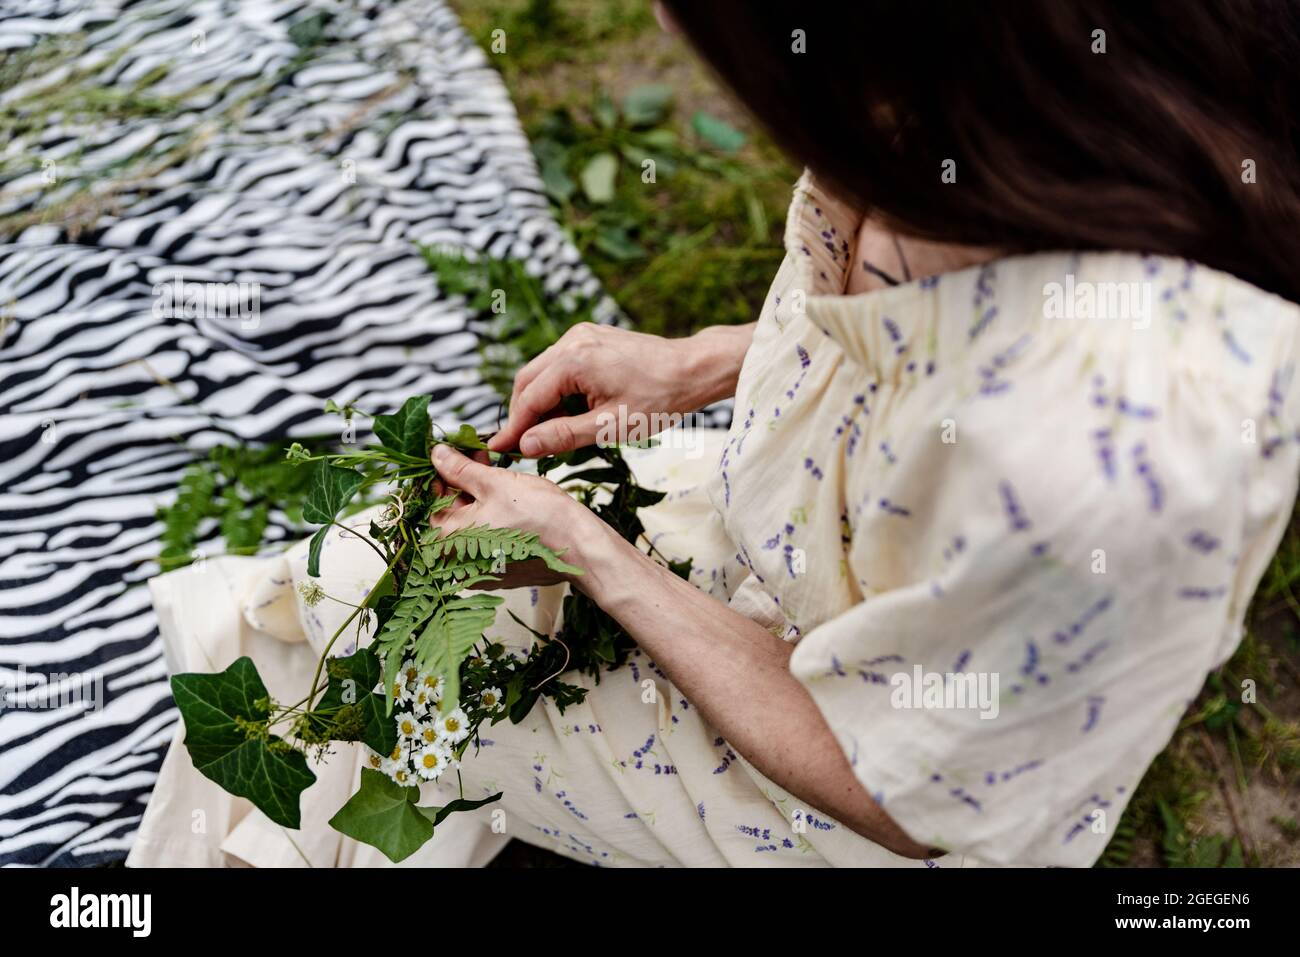 Woman making head wreath with wild flowers. Close up of hands weaving a wreath with green leaves and flowers on midsummer day Stock Photo